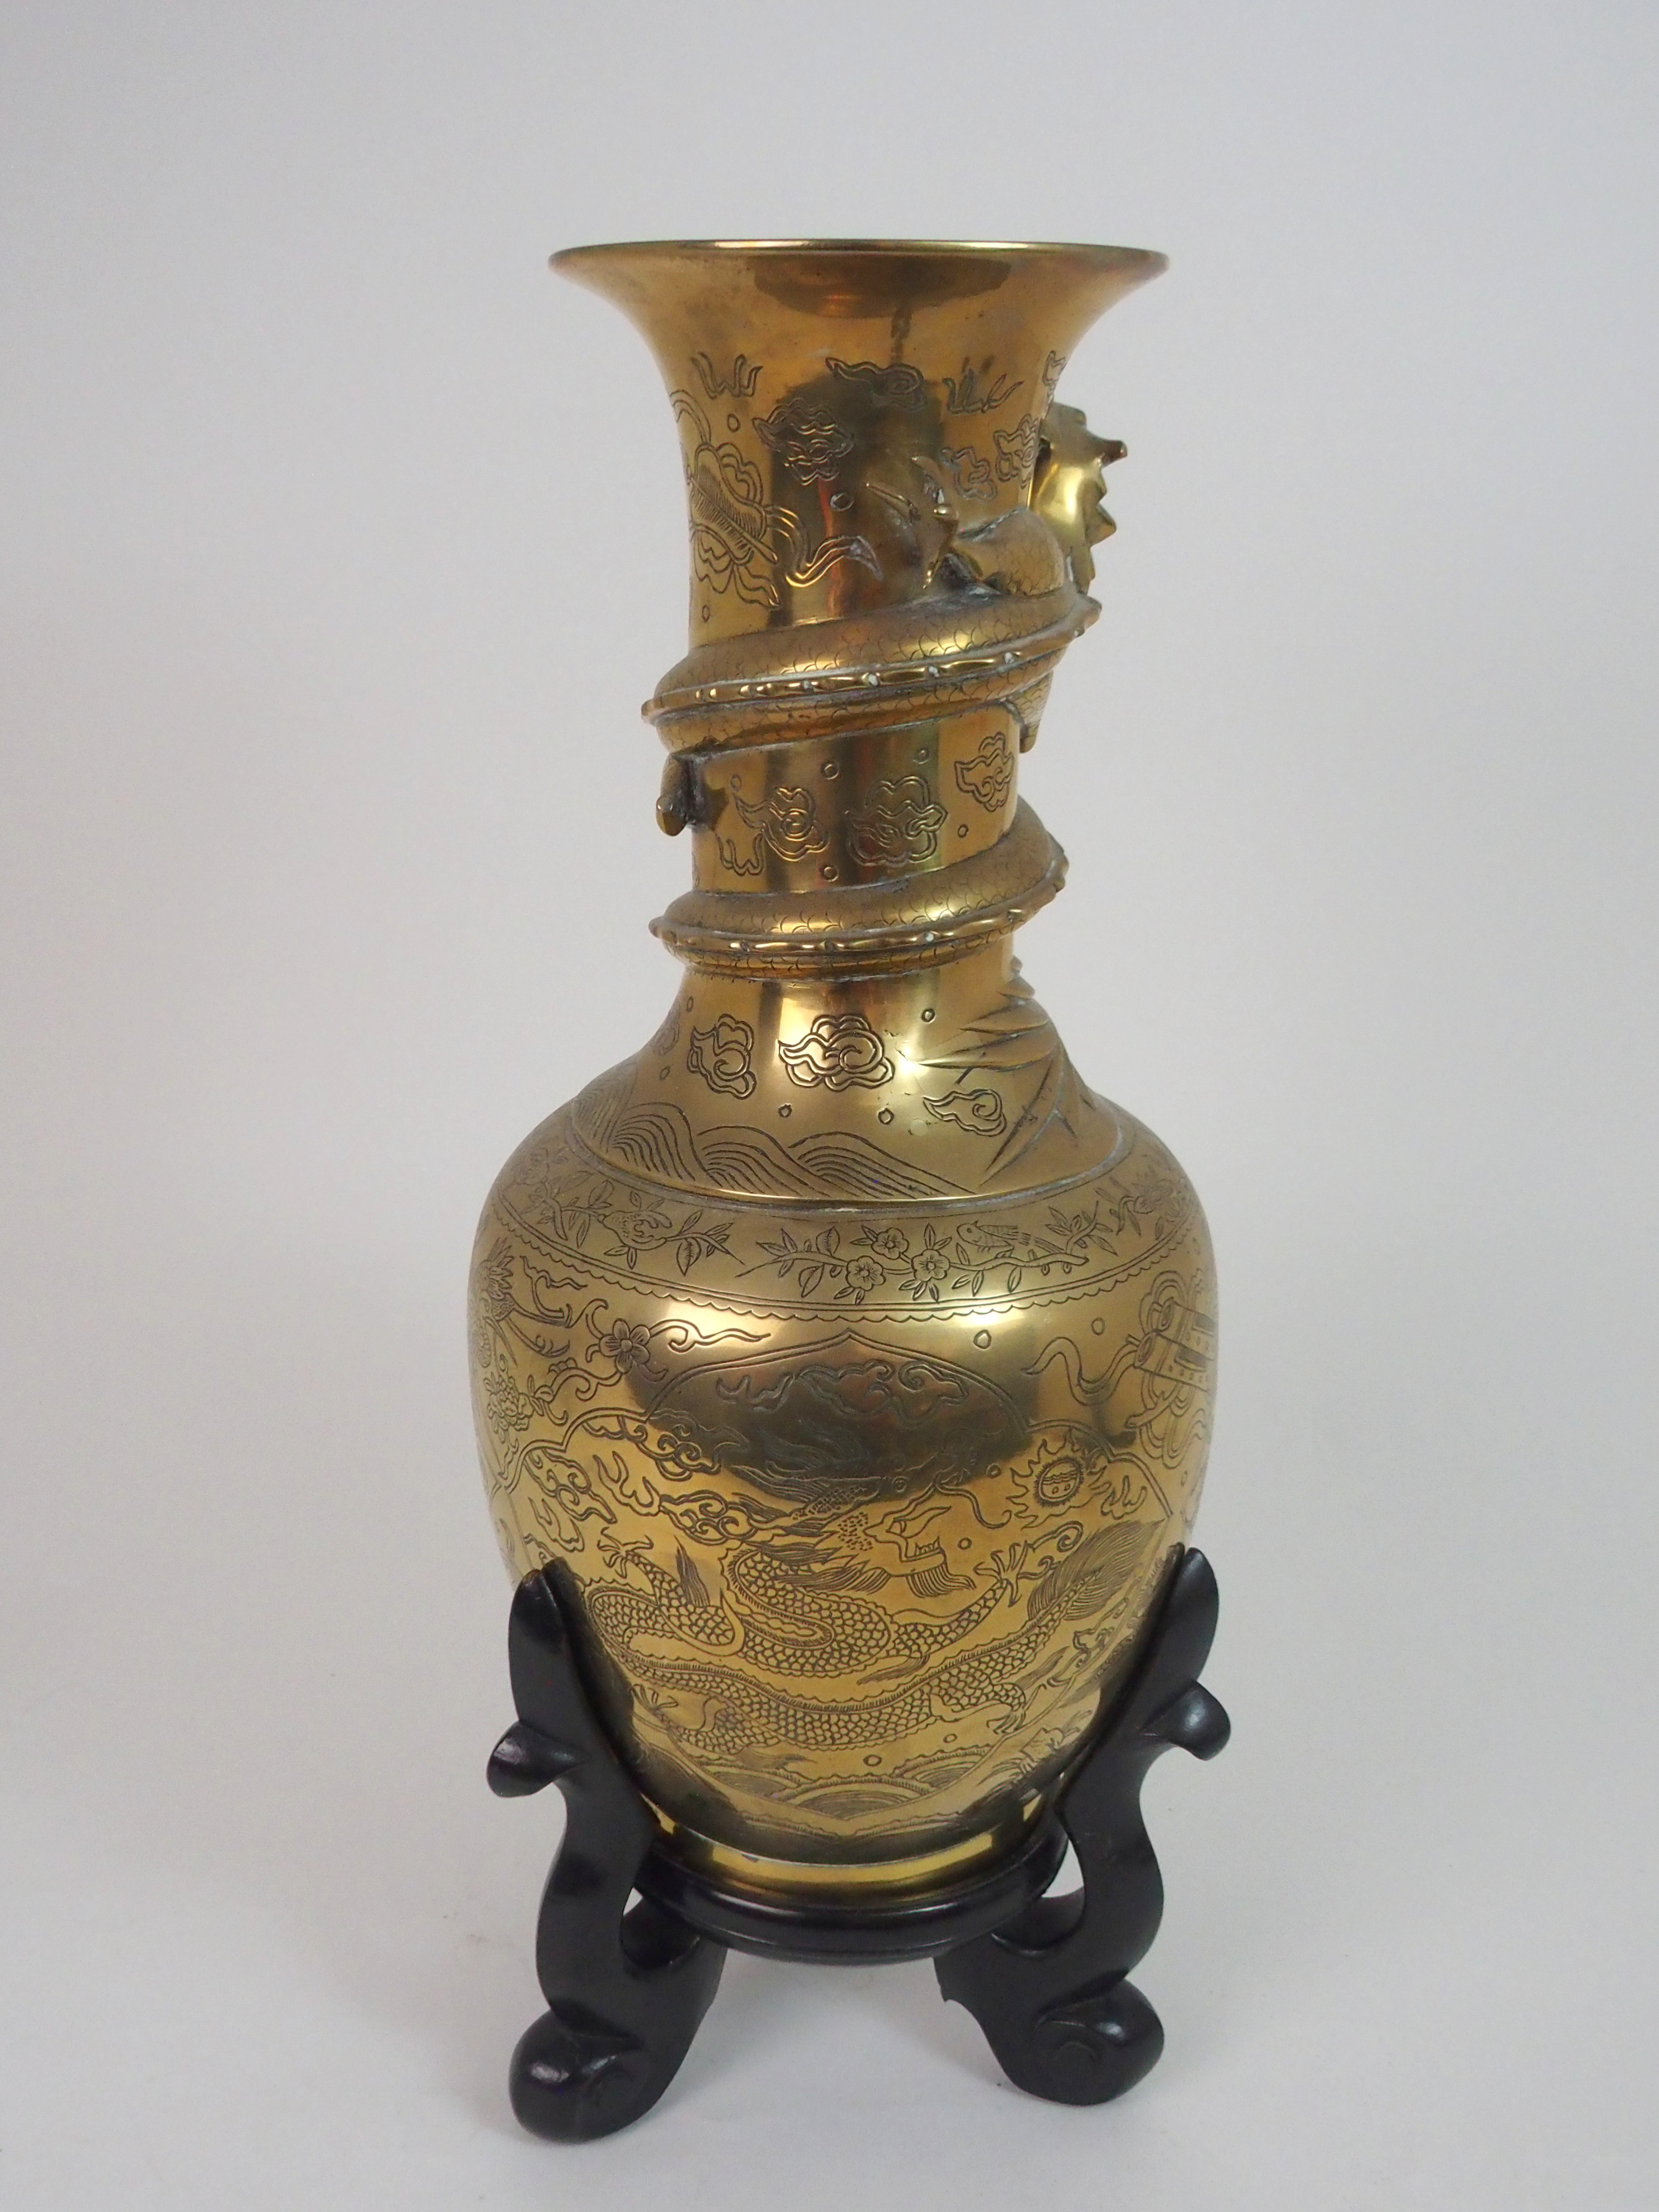 A CHINESE BRASS BALUSTER VASE cast with a dtragon wraped around the neck and above panels of dragons - Image 4 of 8